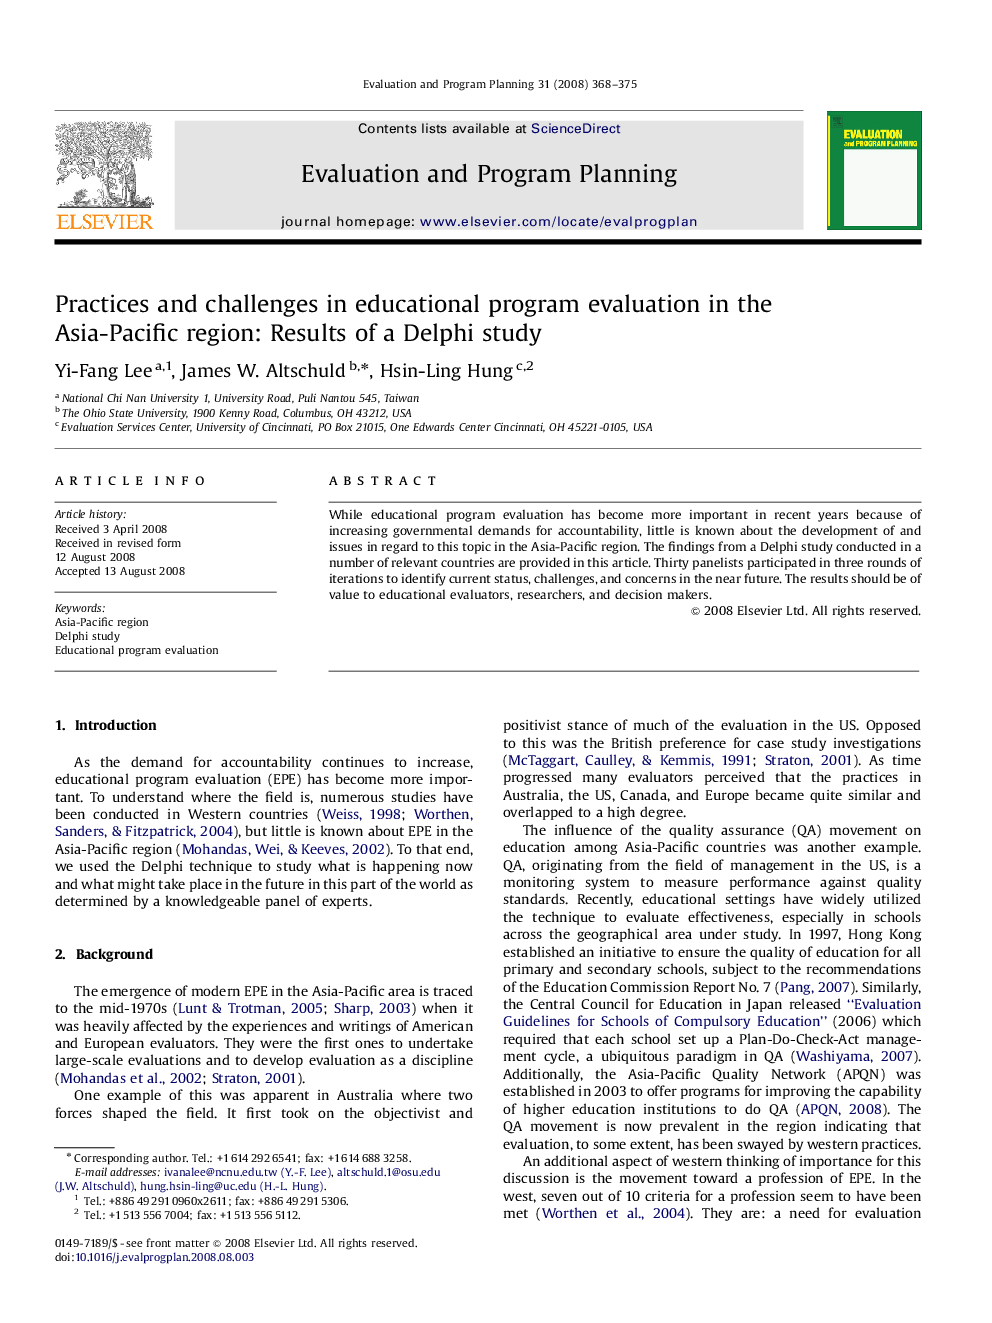 Practices and challenges in educational program evaluation in the Asia-Pacific region: Results of a Delphi study